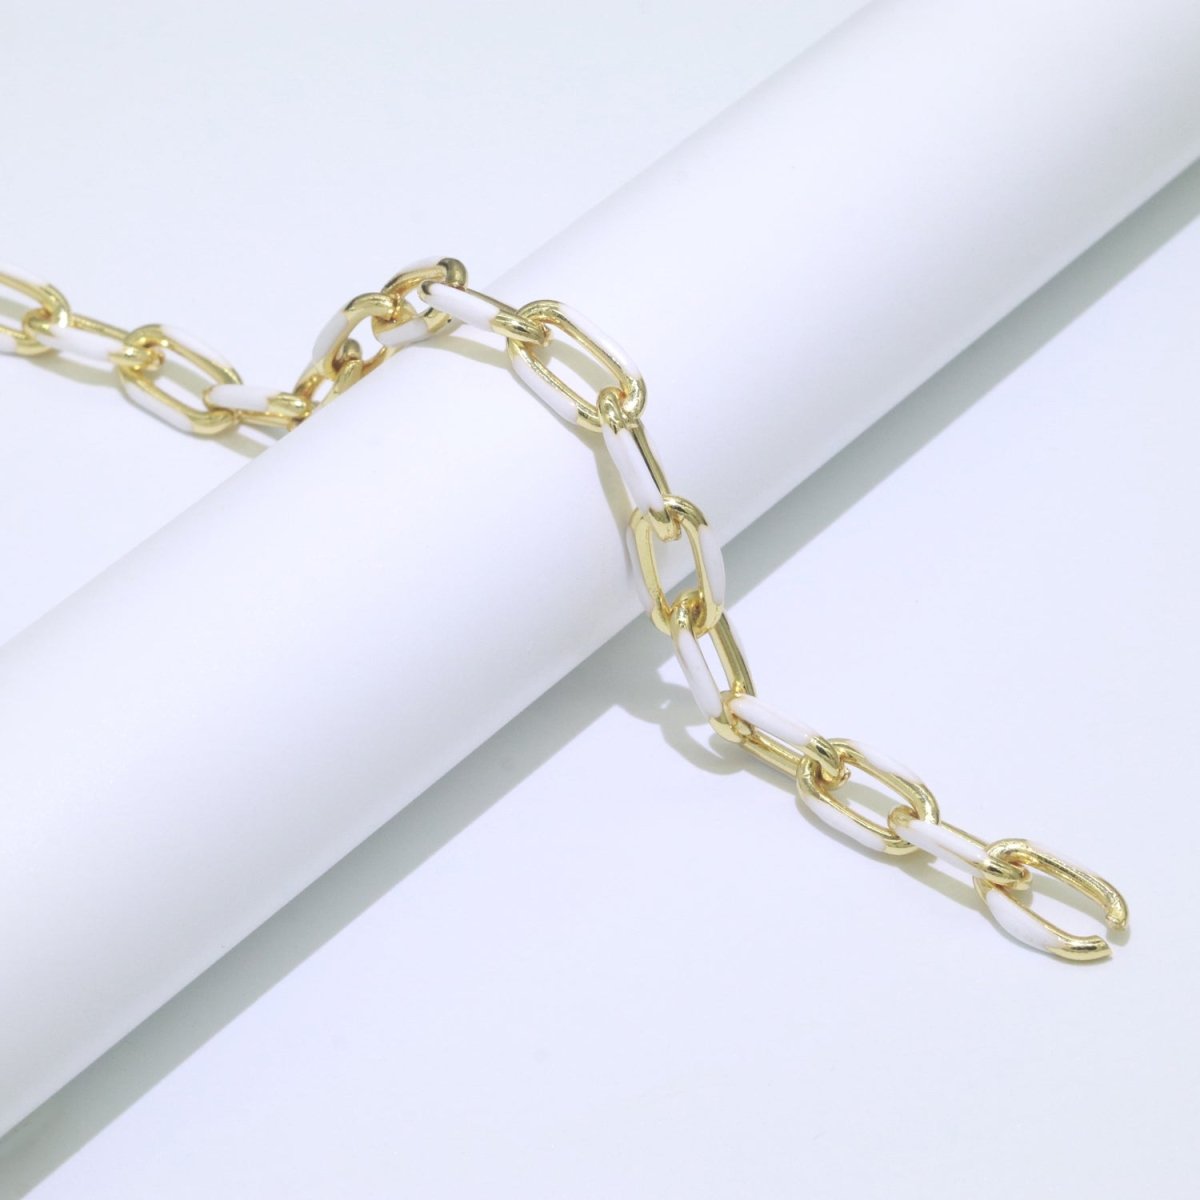 Chunky Gold Multi-Color Enamel CABLE Chain by Yard, Link Cable Thick Elongate Chain, Wholesale Bulk Roll Chain Jewelry | ROLL-517, ROLL-518, ROLL-519, ROLL-520, ROLL-521, ROLL-522, ROLL-523, ROLL-524, ROLL-525, ROLL-526 Clearance Pricing - DLUXCA